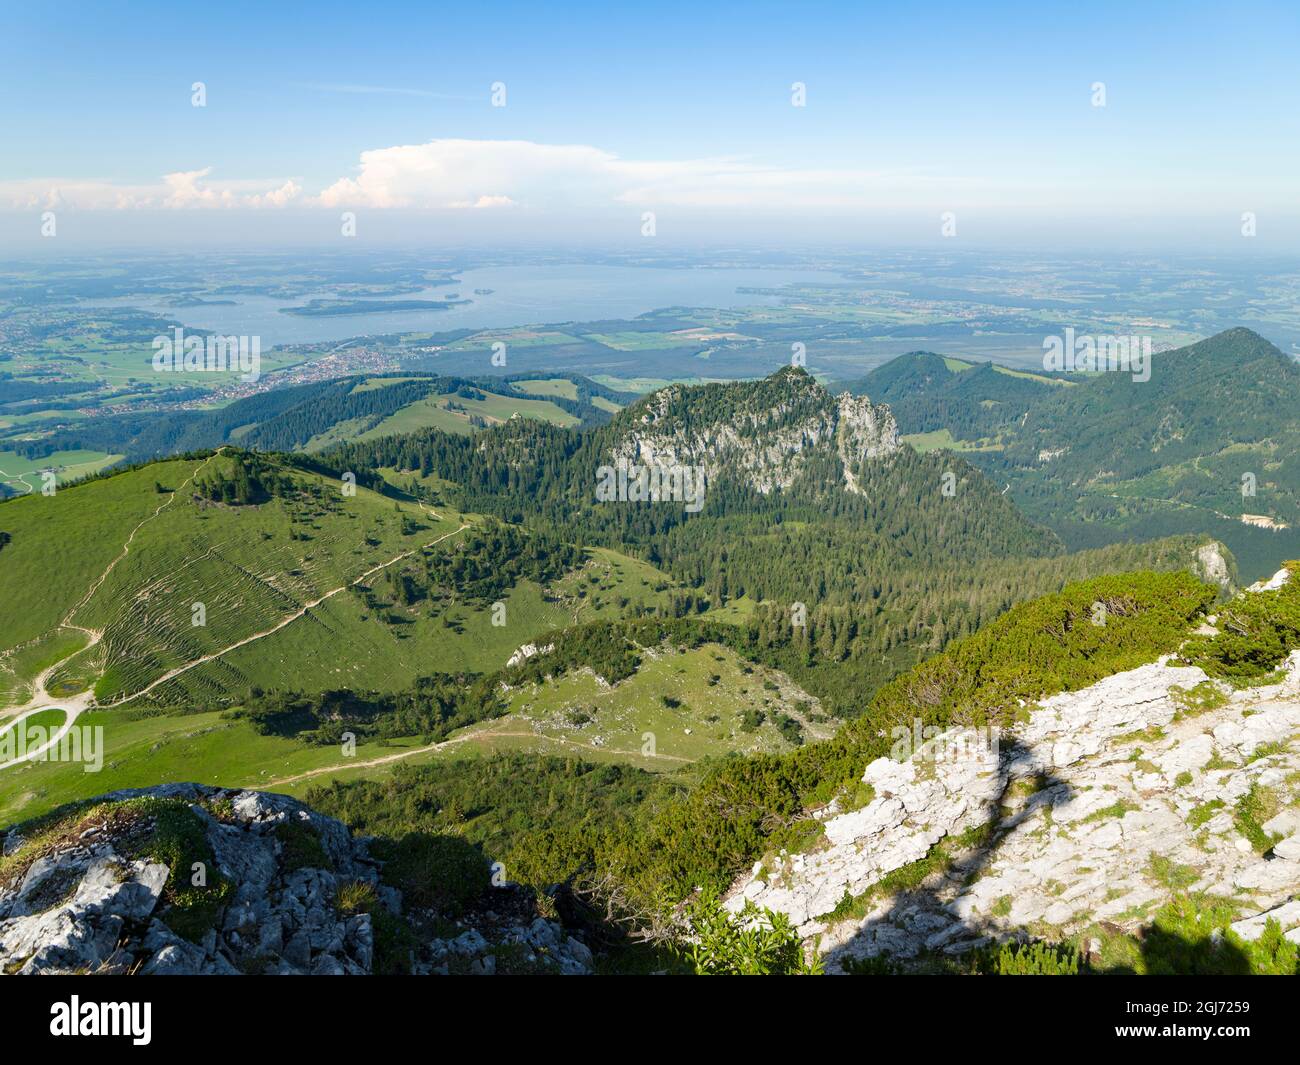 View towards lake Chiemsee and the foothills of the Alps near Rosenheim and Prien. Europe, Germany, Bavaria Stock Photo